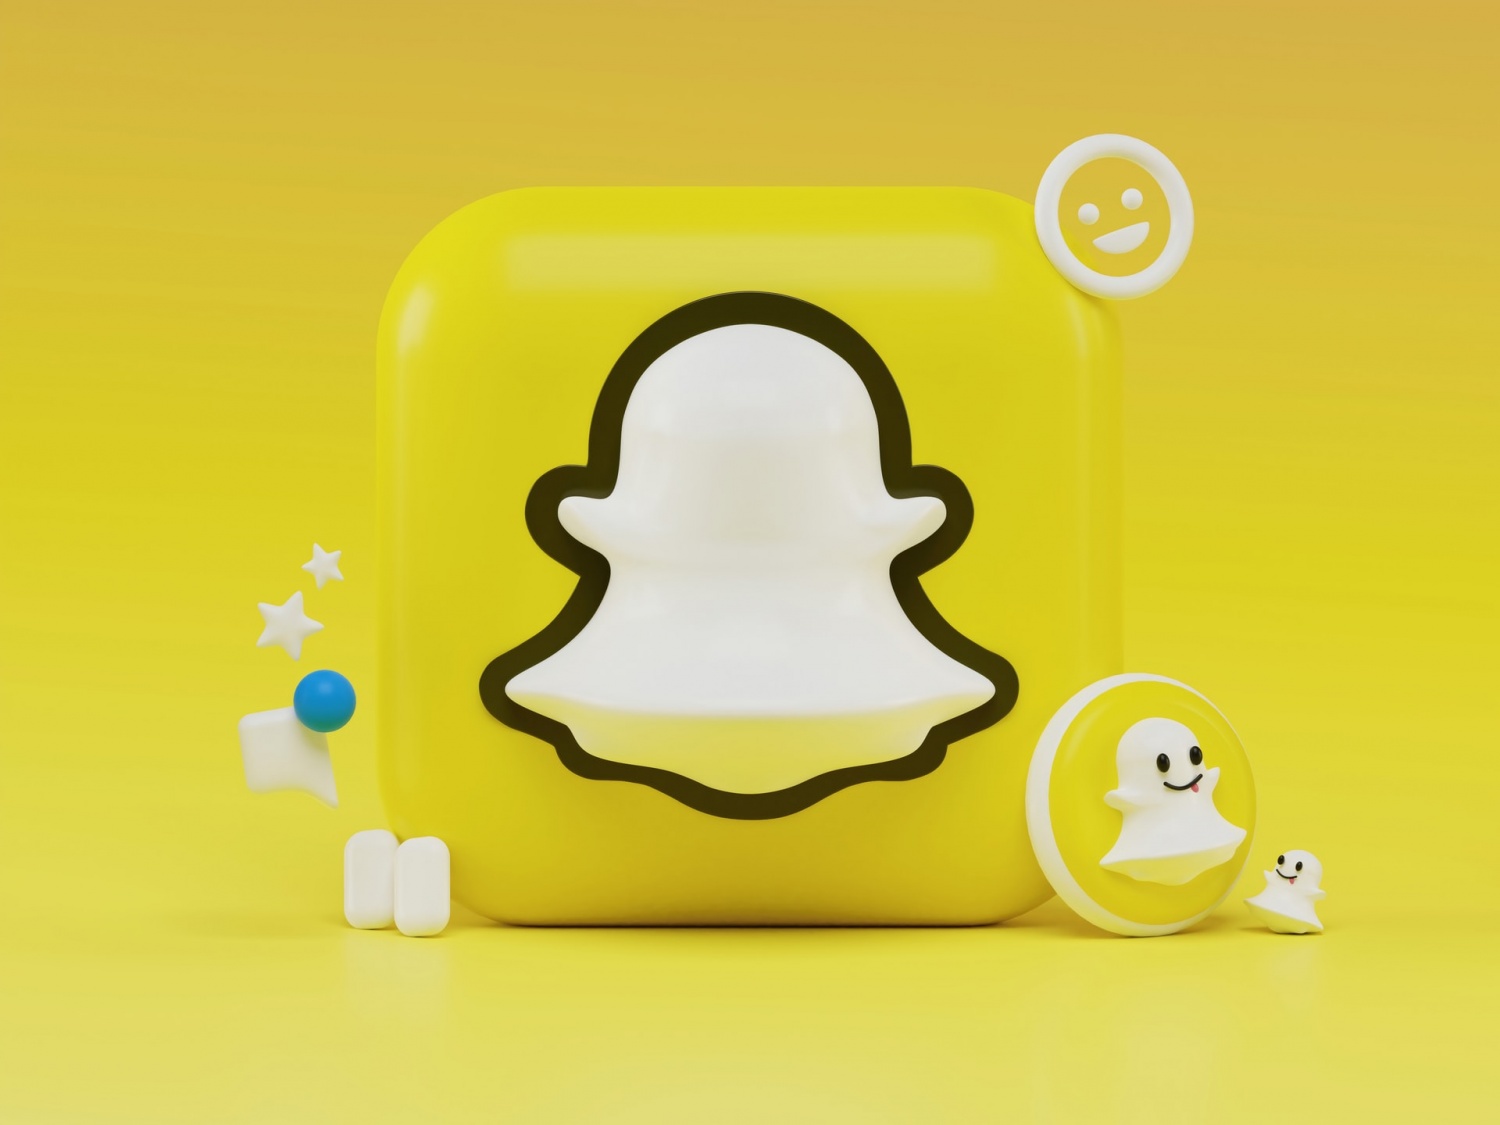 Snap Kit Platform Implements Changes: No More Anonymous Messaging Apps